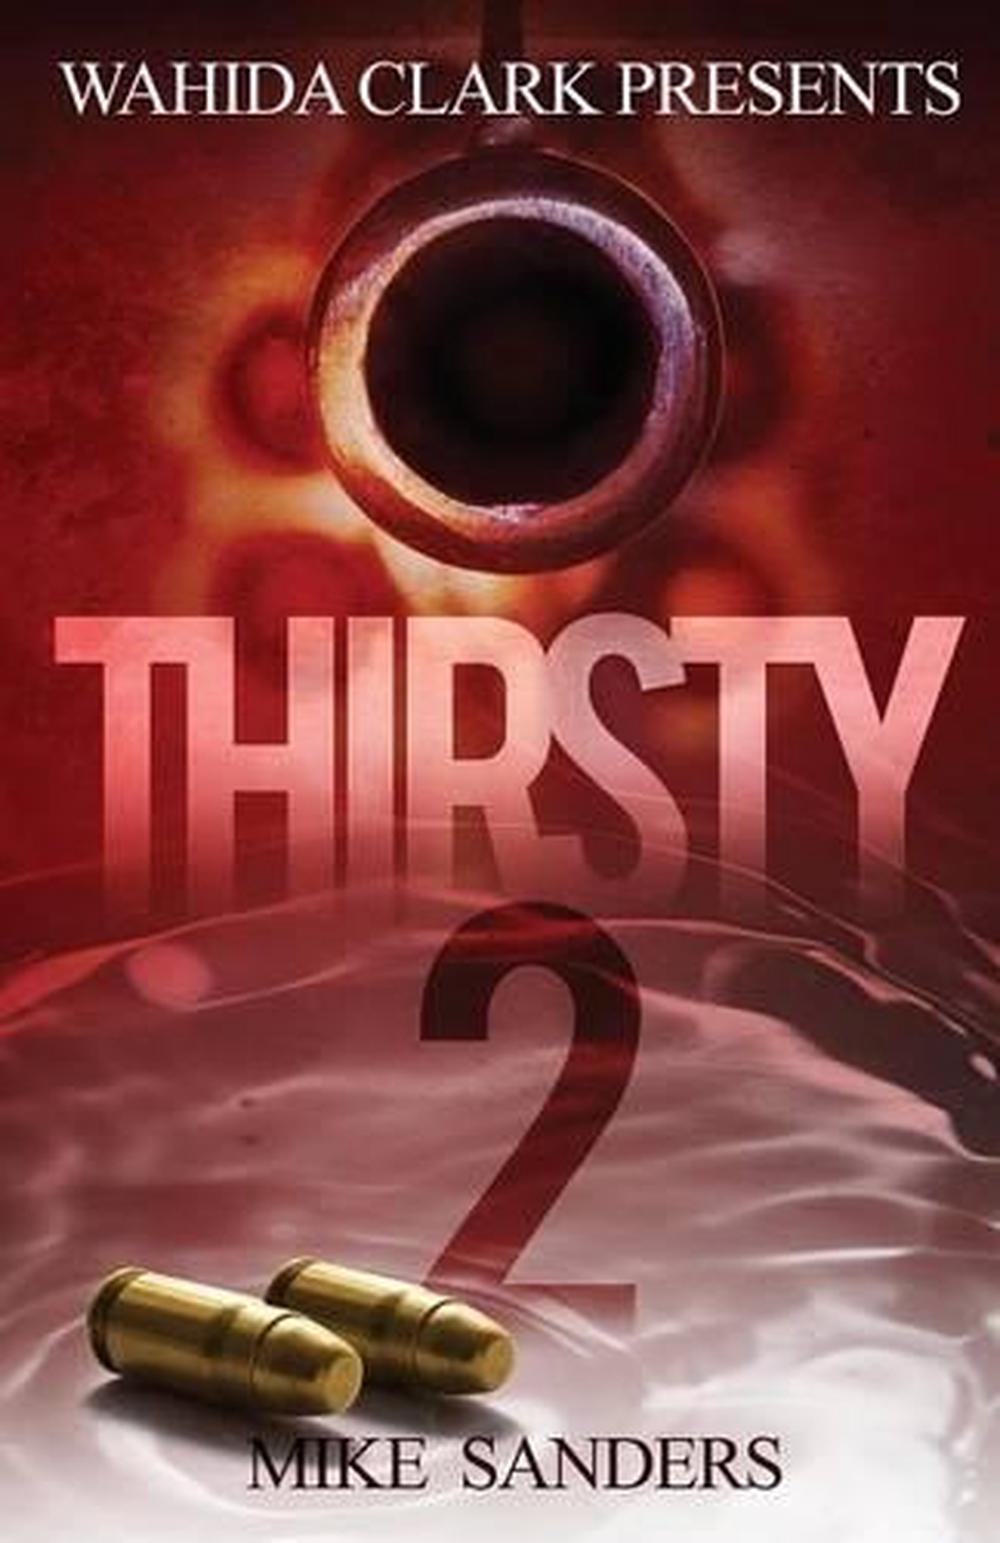 Thirsty 2 by Mike Sanders (English) Paperback Book Free Shipping